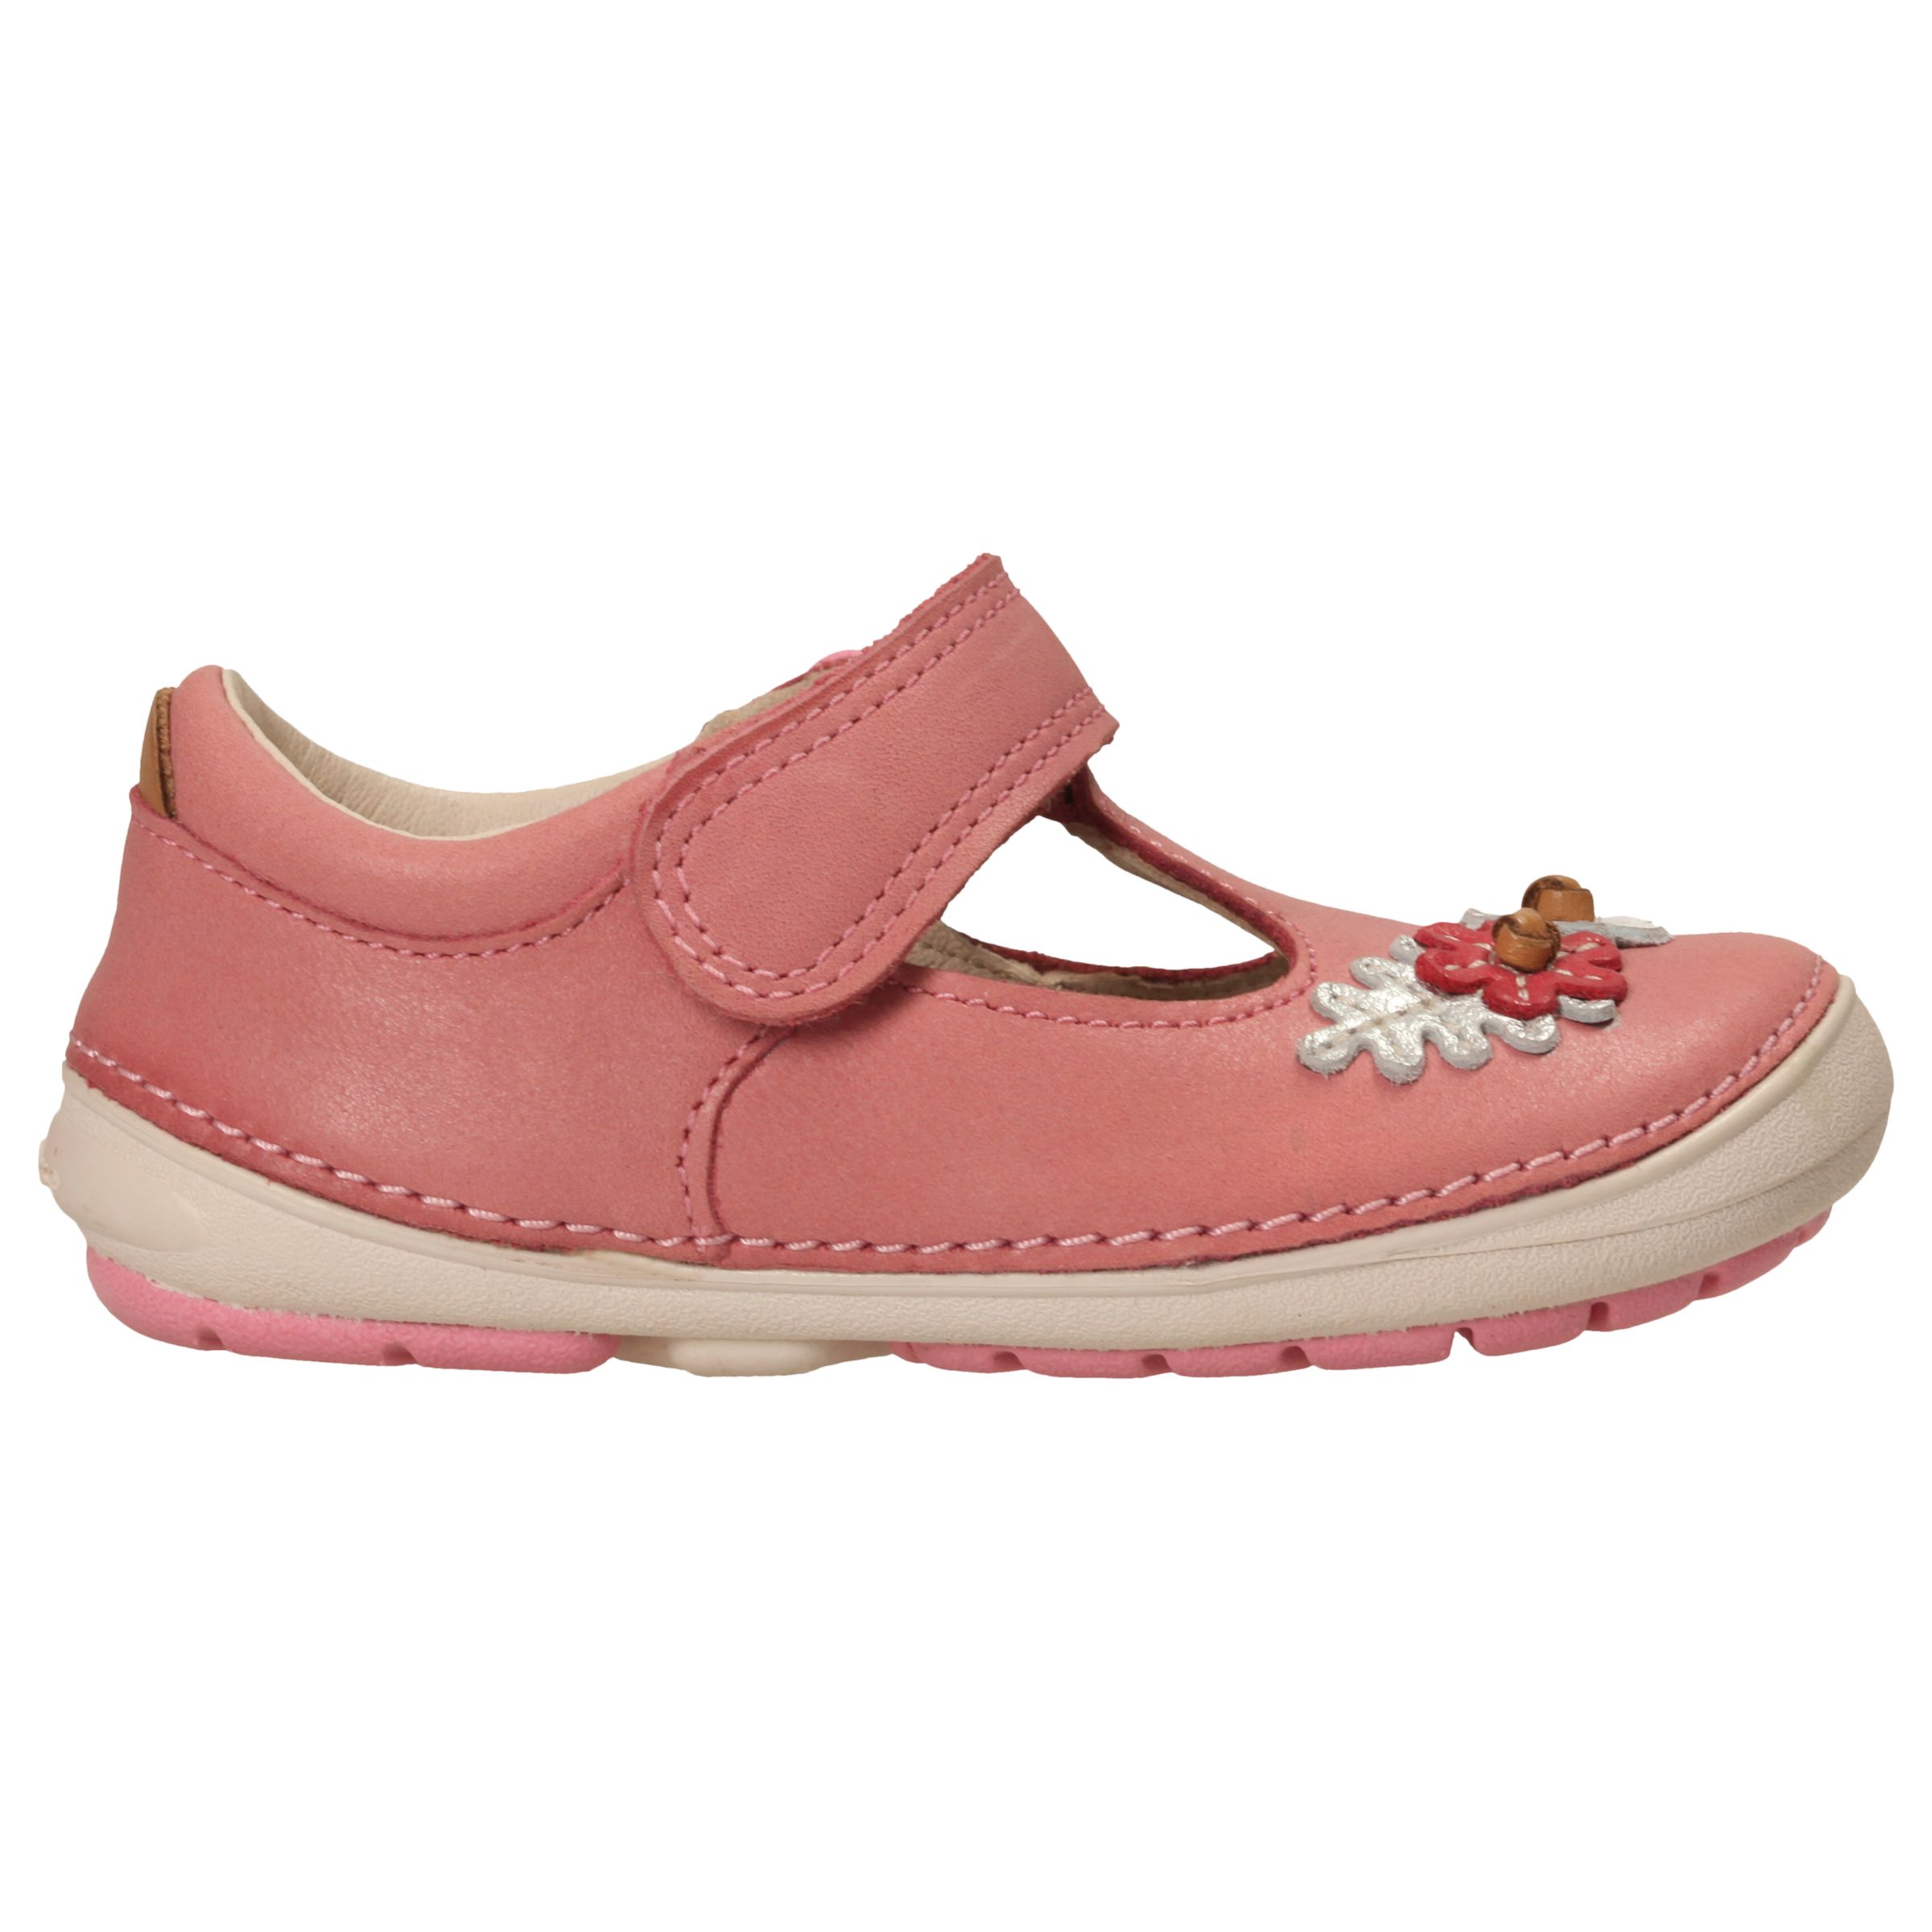 Clarks Children's Softly Blossom First Shoes, Pink